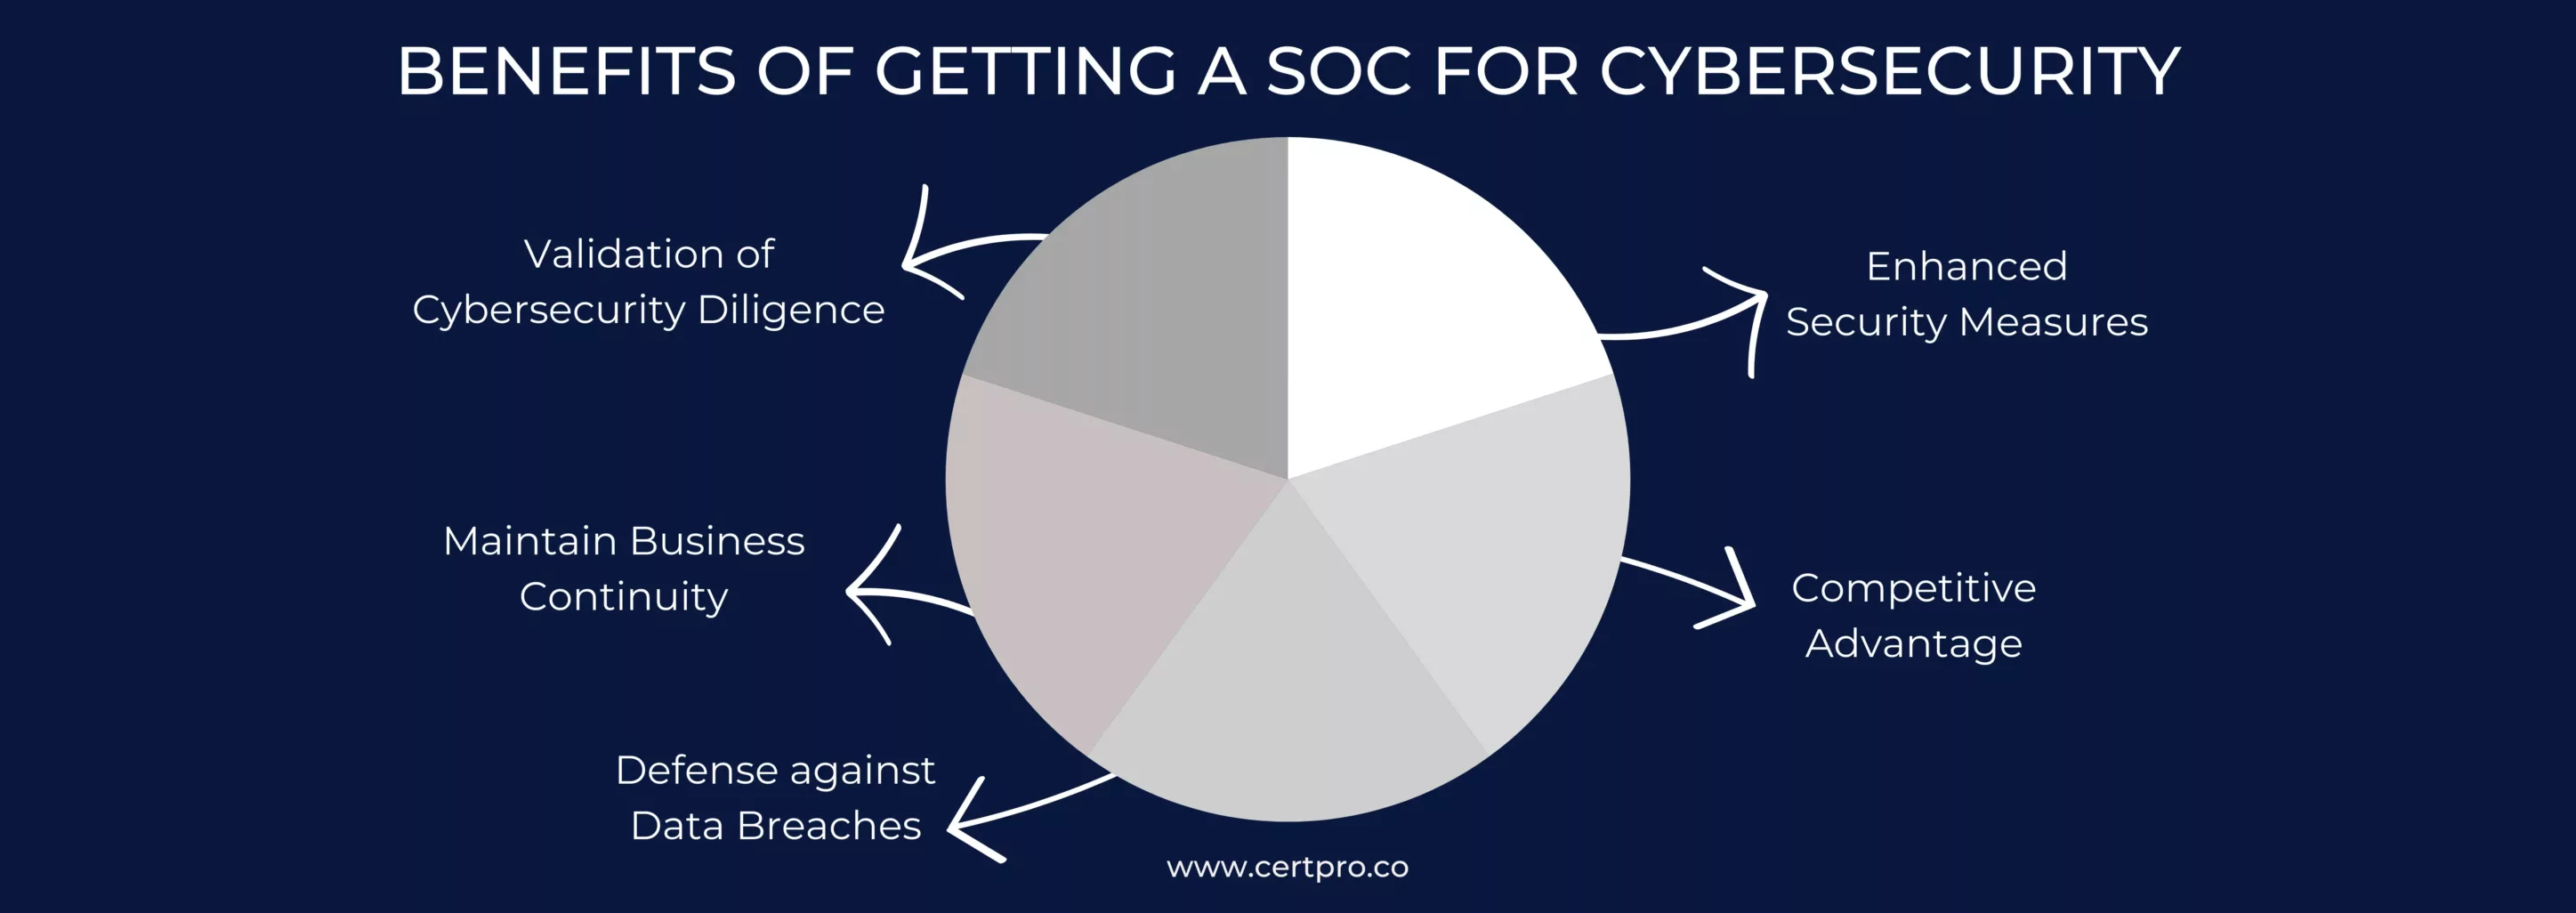 HOW DOES SOC 2 ENSURE BUSINESS CONTINUITY